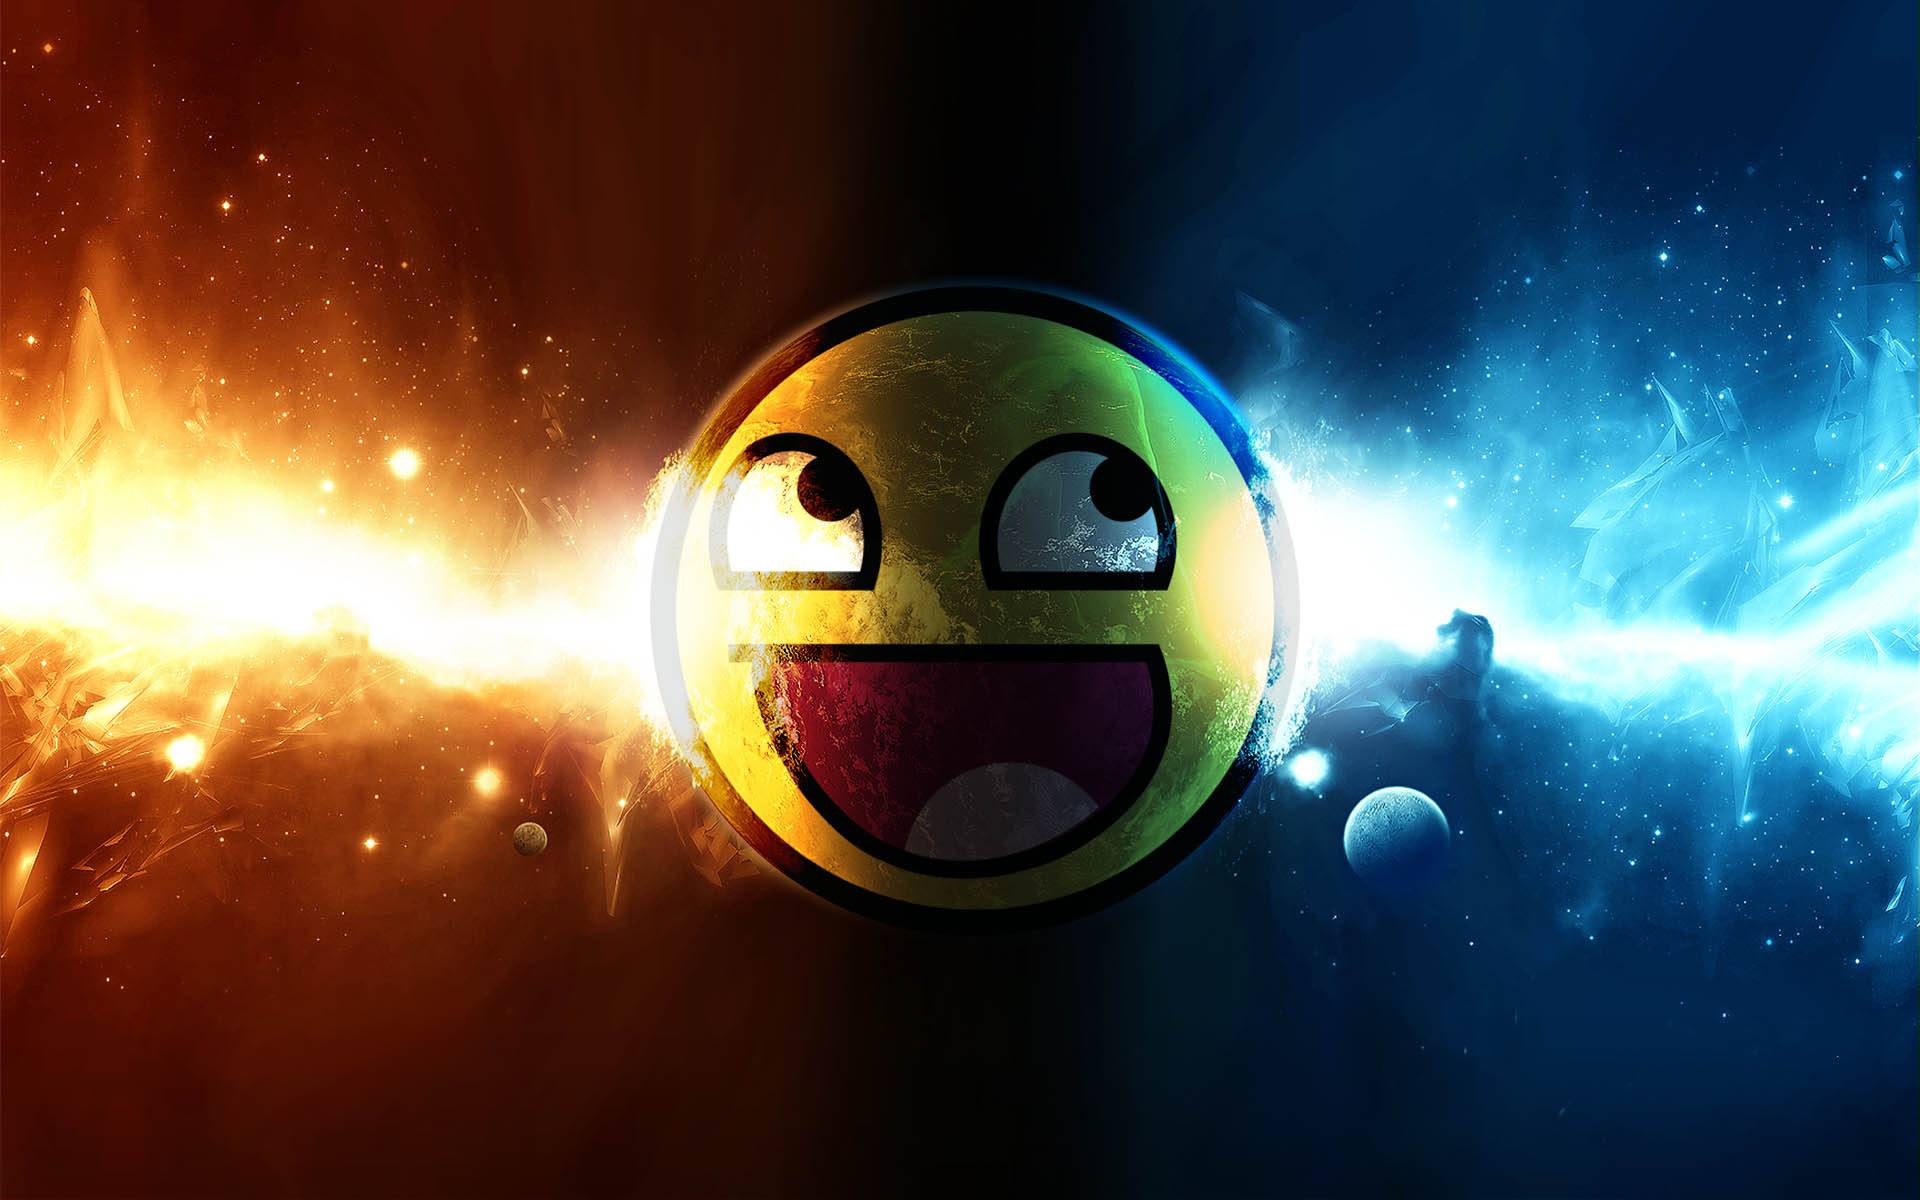  Awesome Cool 3D Smiley Background Free Wallpapers   Fullsize Wallpaper